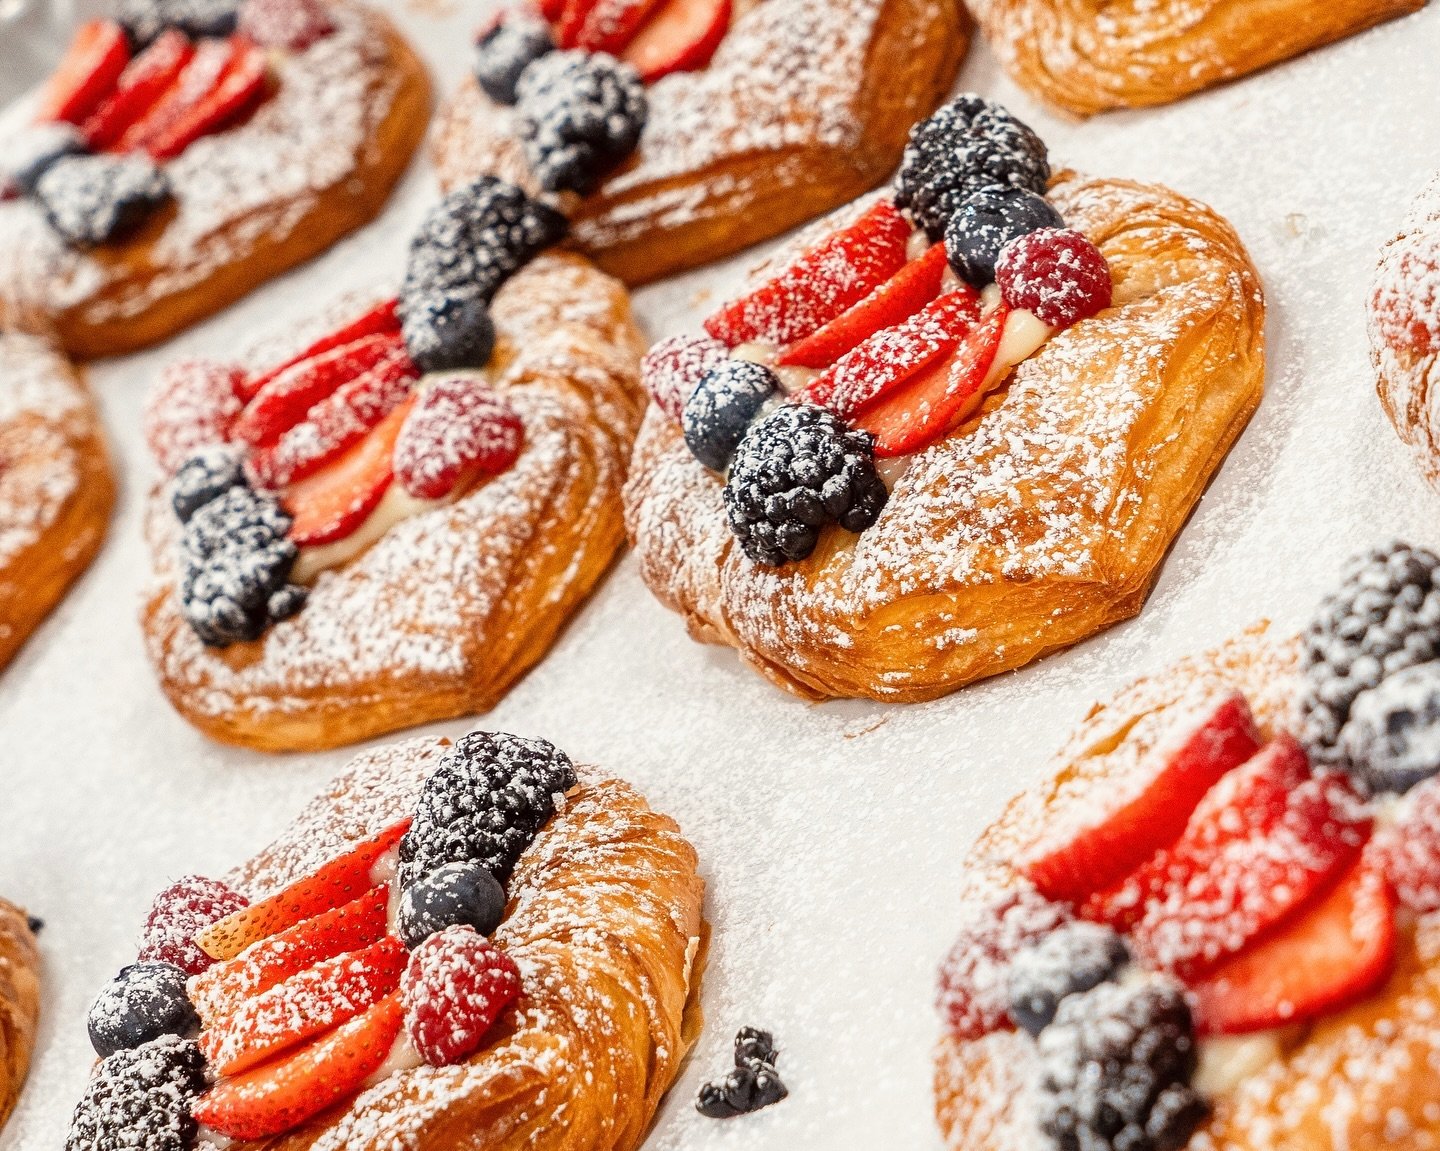 🍓🫐🍓 FRESH FRUIT DANISH 🥐🫐🍓 
⠀
🔎 Inside this danish, you&rsquo;ll find a generous piping of Vanilla Pastry Cream, the Freshest Fruit we can get our hands on - Blueberries, Blackberries, Strawberries, all dusted with Powdered Sugar. 😋 It&rsquo;